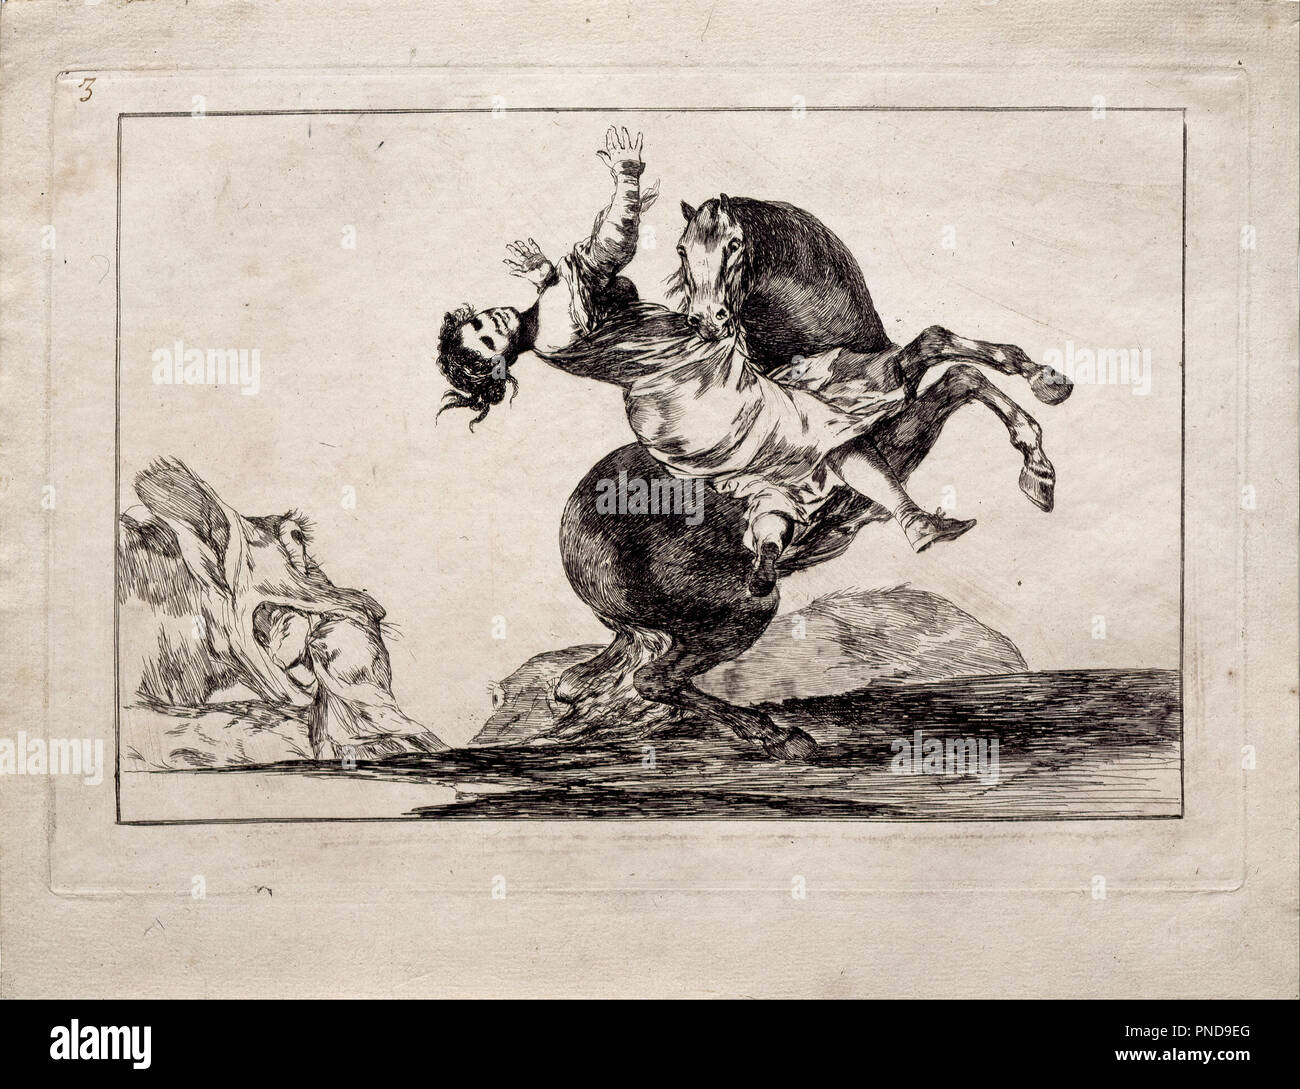 Woman Carried off by a Horse. Date/Period: 1815 - 1819. Print. Height: 245 mm (9.64 in); Width: 357 mm (14.05 in). Author: GOYA Y LUCIENTES, FRANCISCO DE. GOYA, FRANCISCO DE. Stock Photo